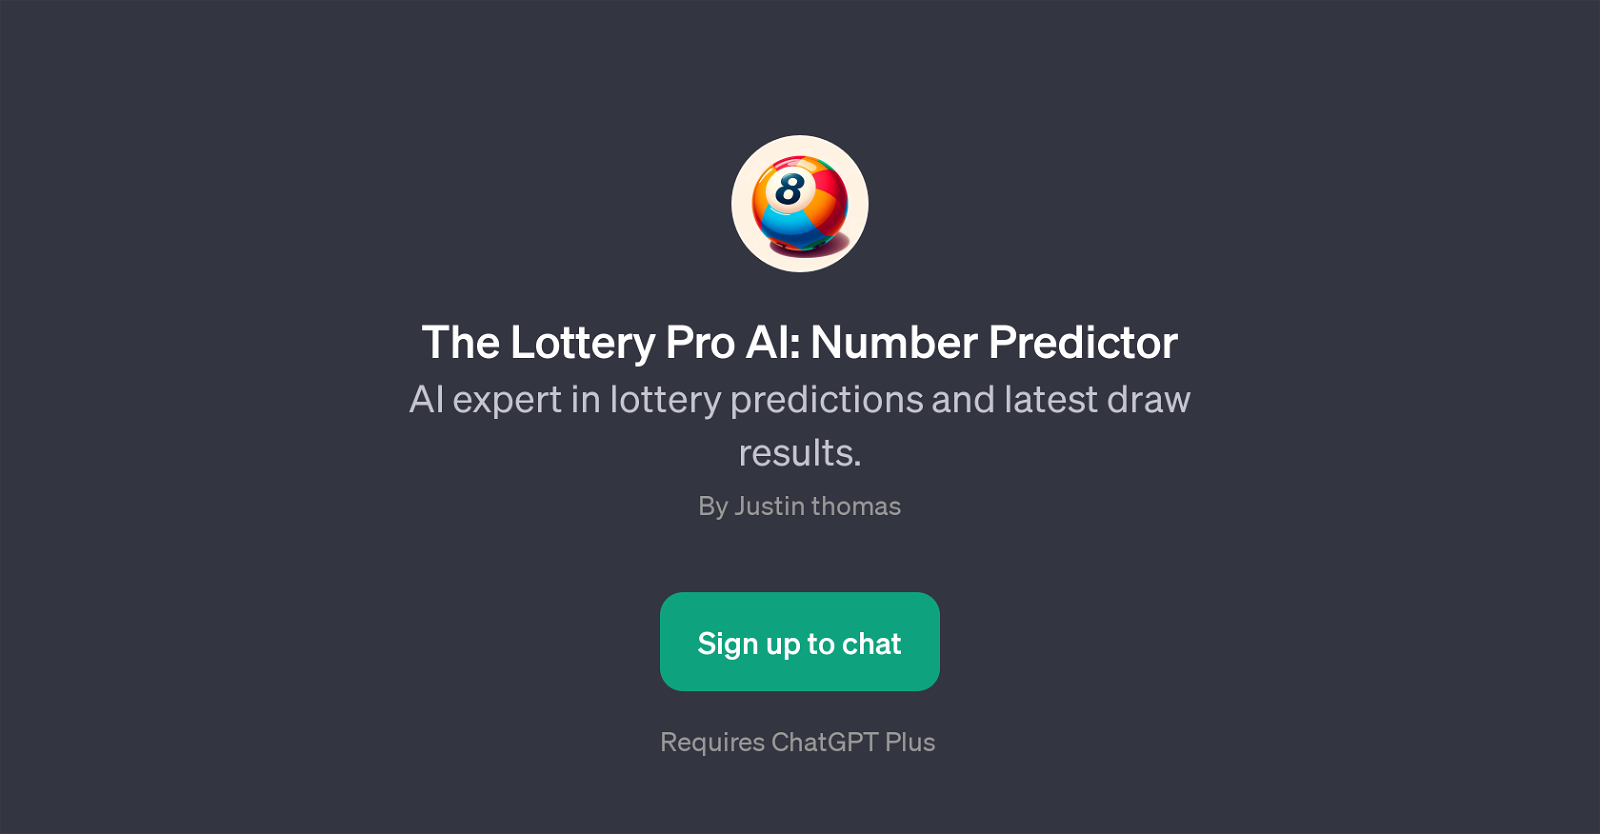 The Lottery Pro AI: Number Predictor website